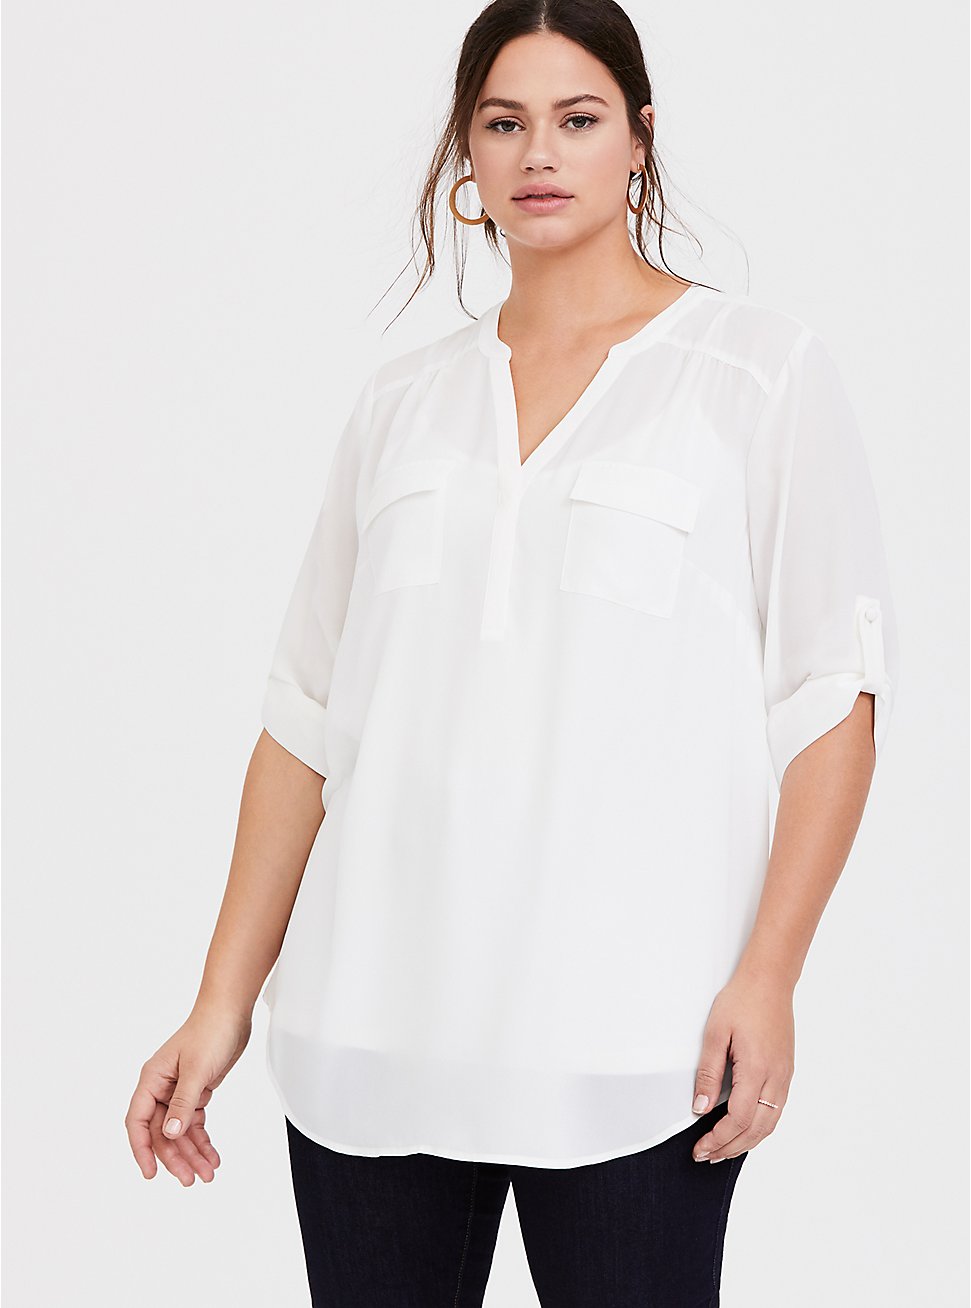 Plus Size - Harper - Ivory Georgette Pullover Tunic Blouse - Torrid